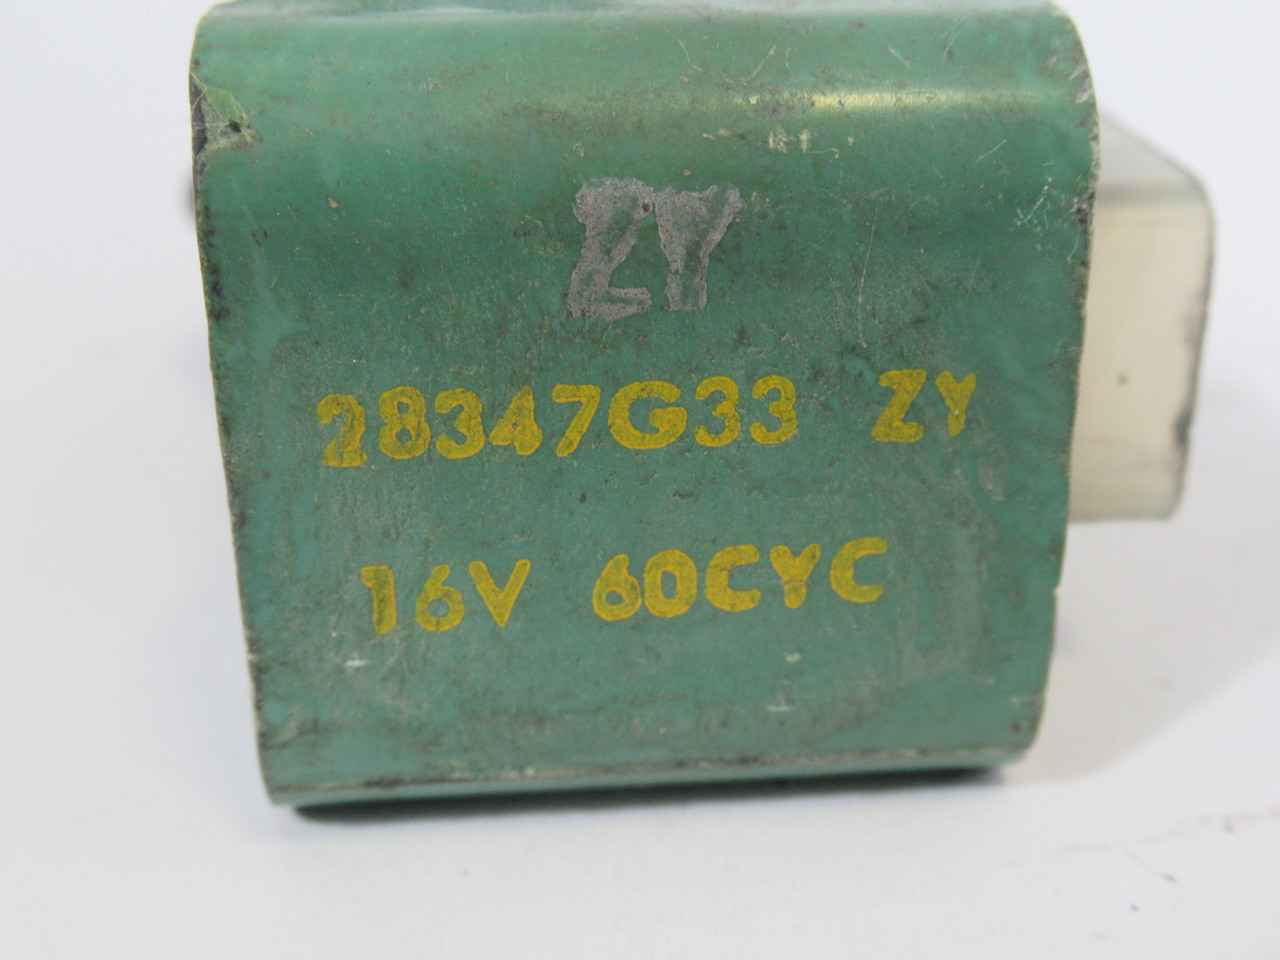 Asco 28347G33 Solenoid Coil 16V@60CYC *Cosmetic Damage* USED